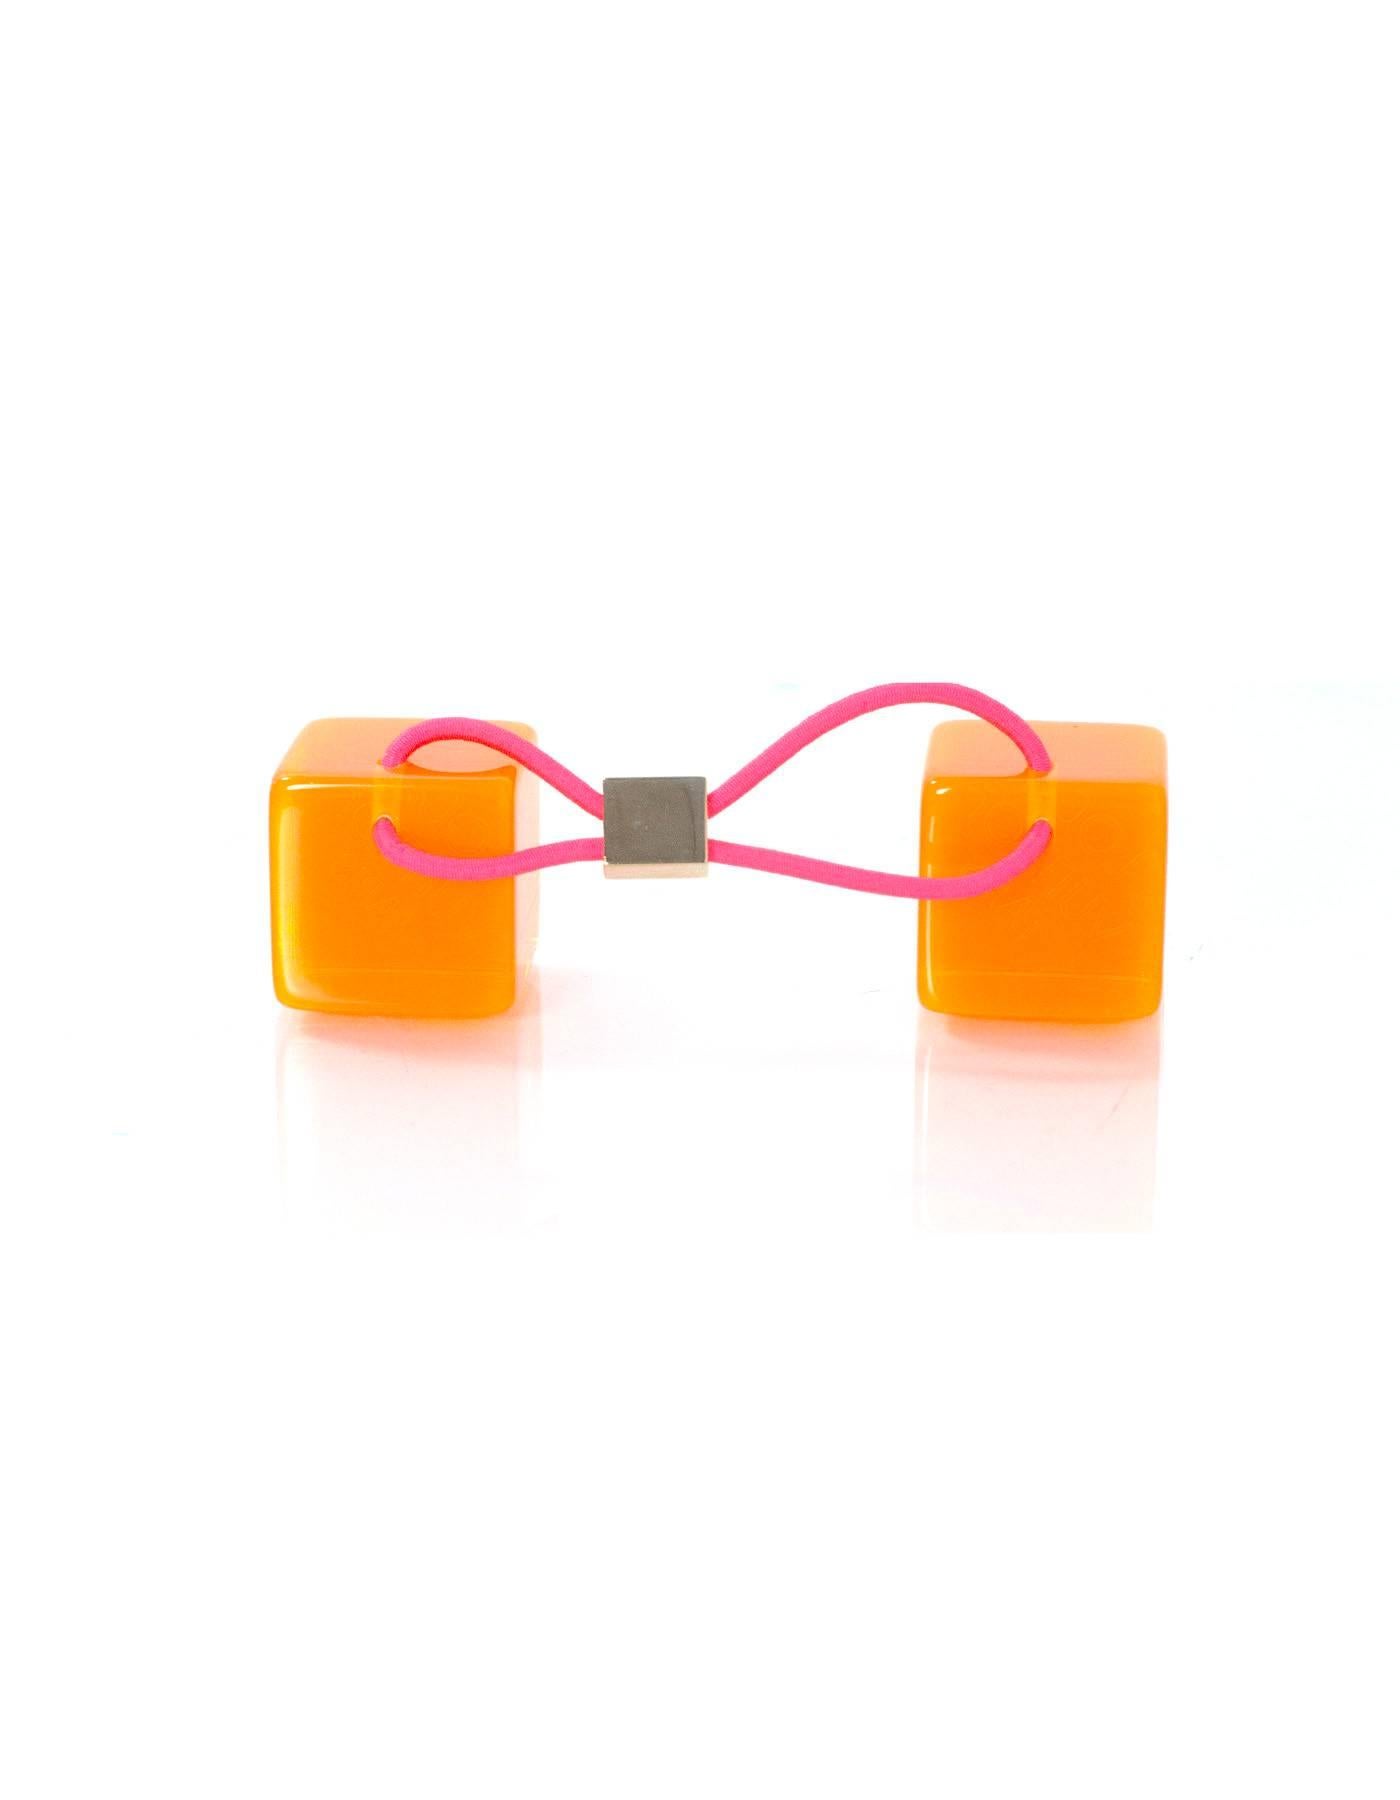 Louis Vuitton Orange Hair Cubes

Color: Orange
Hardware: Goldtone
Materials: Lucite, brass, elasticized band
Retail Price: $295 + tax
Overall Condition: Excellent pre-owned condition with the exception of some surface marks

Measurements: 
1"L